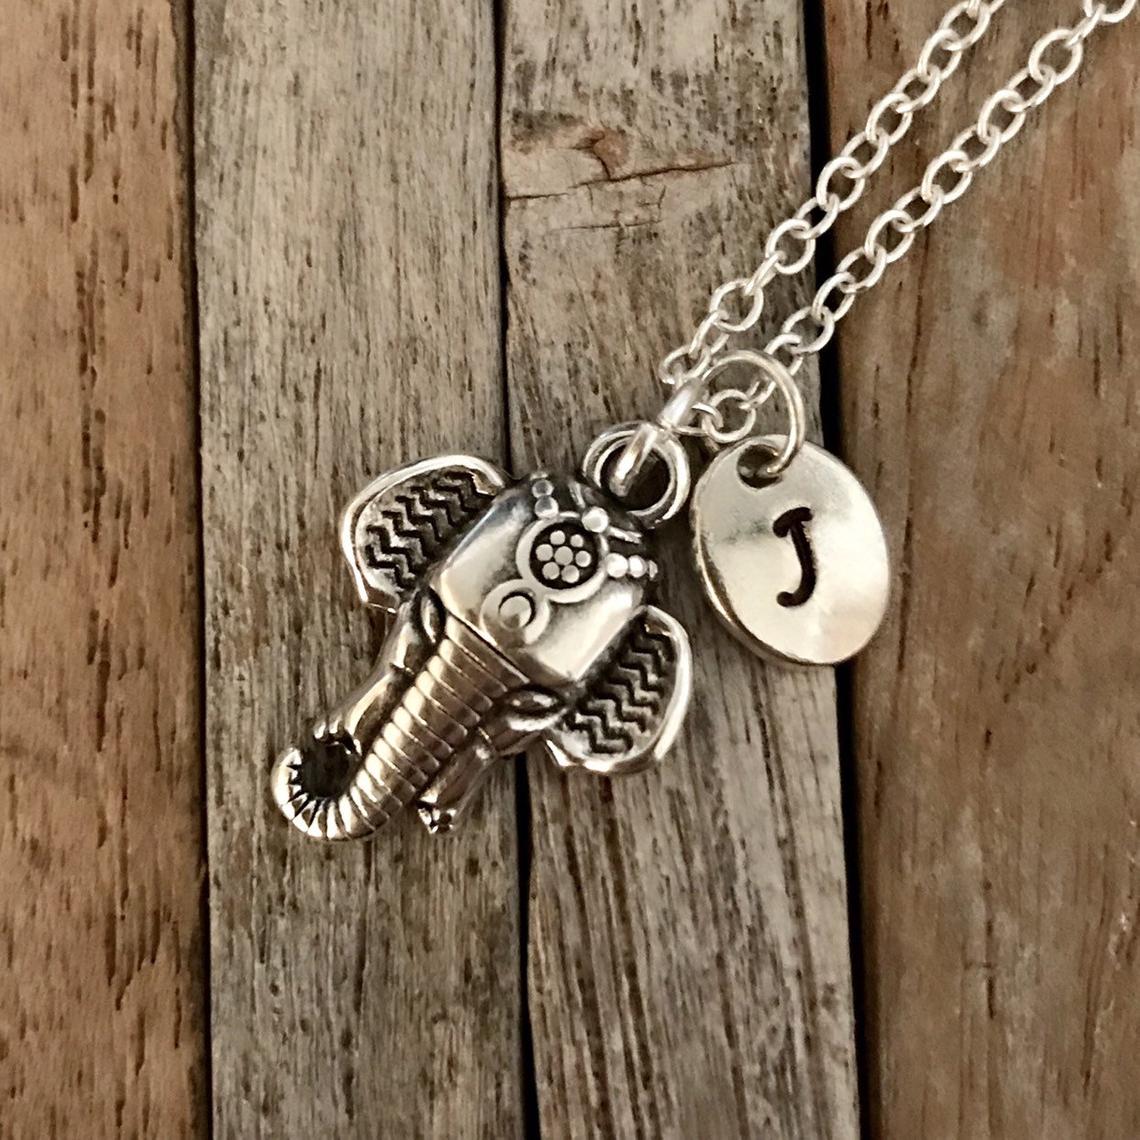 Personalized custom elephant necklace, Good luck charm